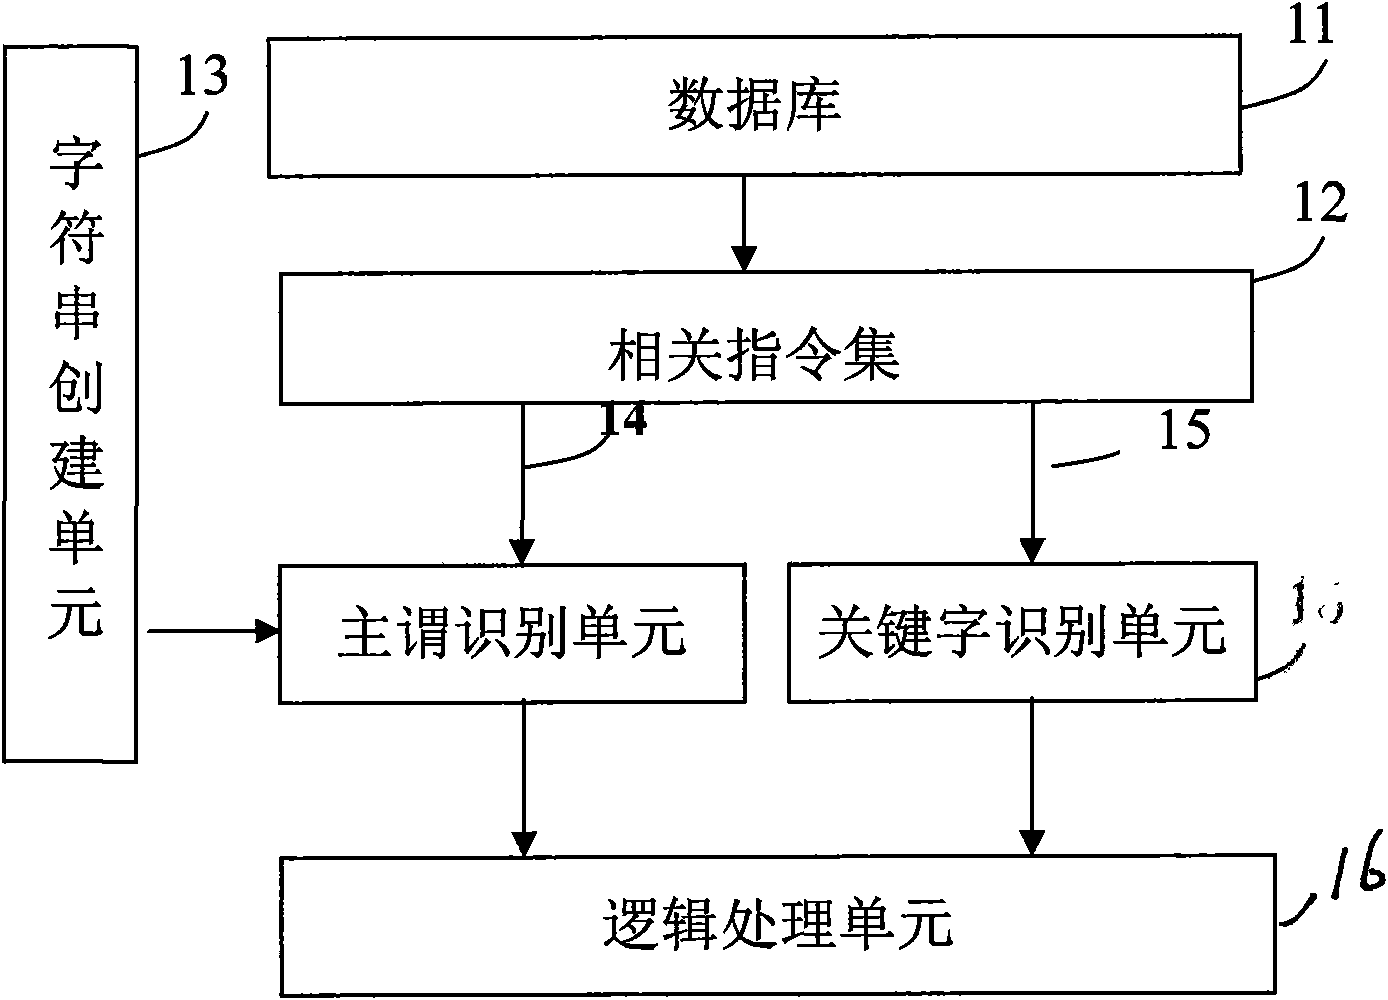 System and method for ensuring computer to understand natural languages